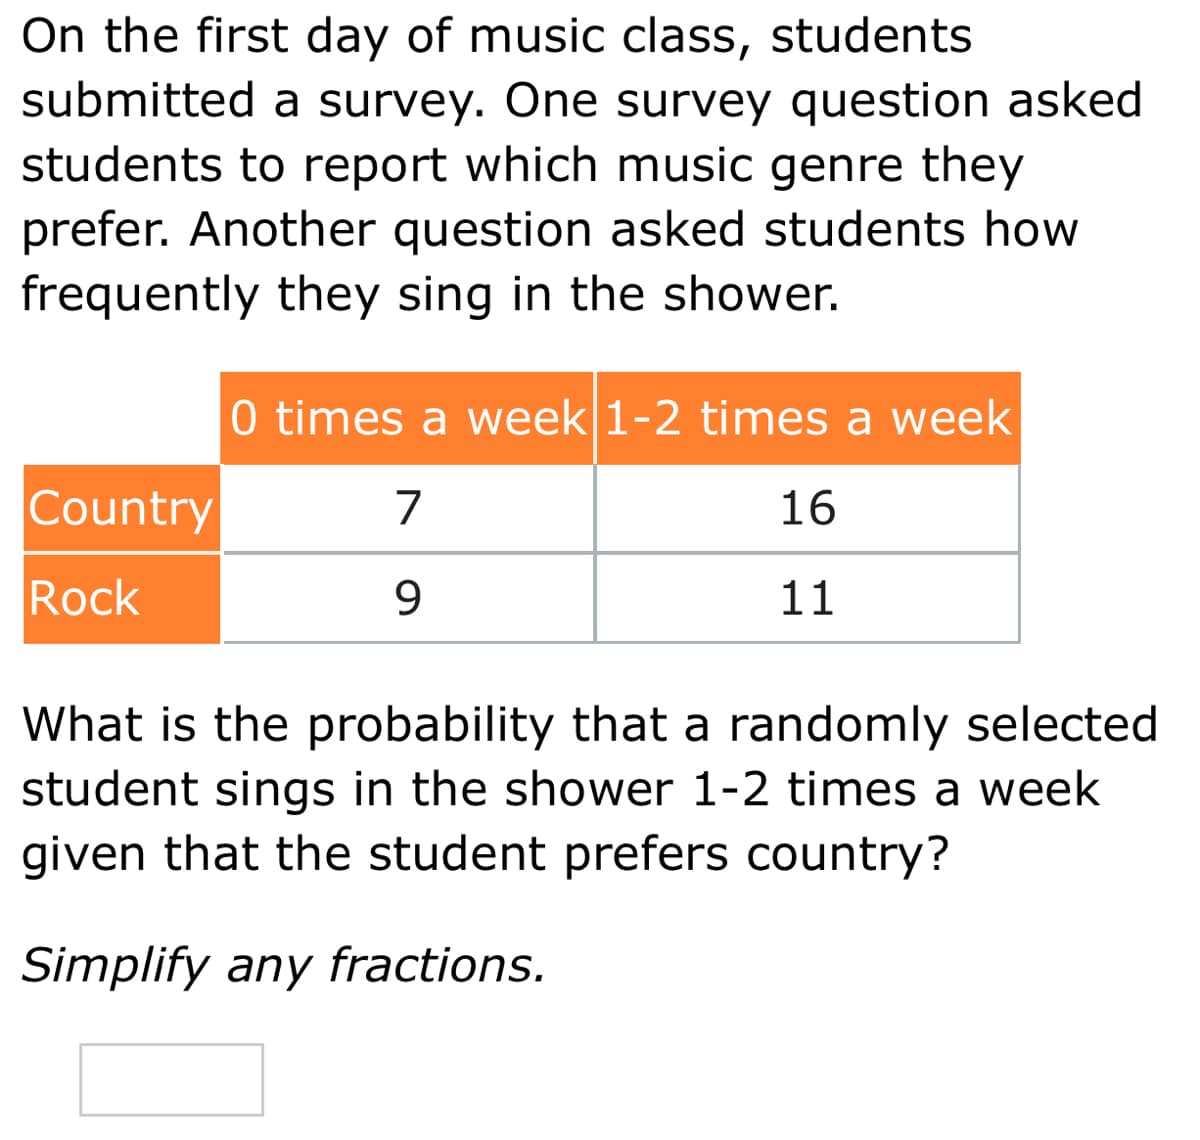 On the first day of music class, students
submitted a survey. One survey question asked
students to report which music genre they
prefer. Another question asked students how
frequently they sing in the shower.
0 times a week 1-2 times a week
Country
7
16
Rock
9.
11
What is the probability that a randomly selected
student sings in the shower 1-2 times a week
given that the student prefers country?
Simplify any fractions.
